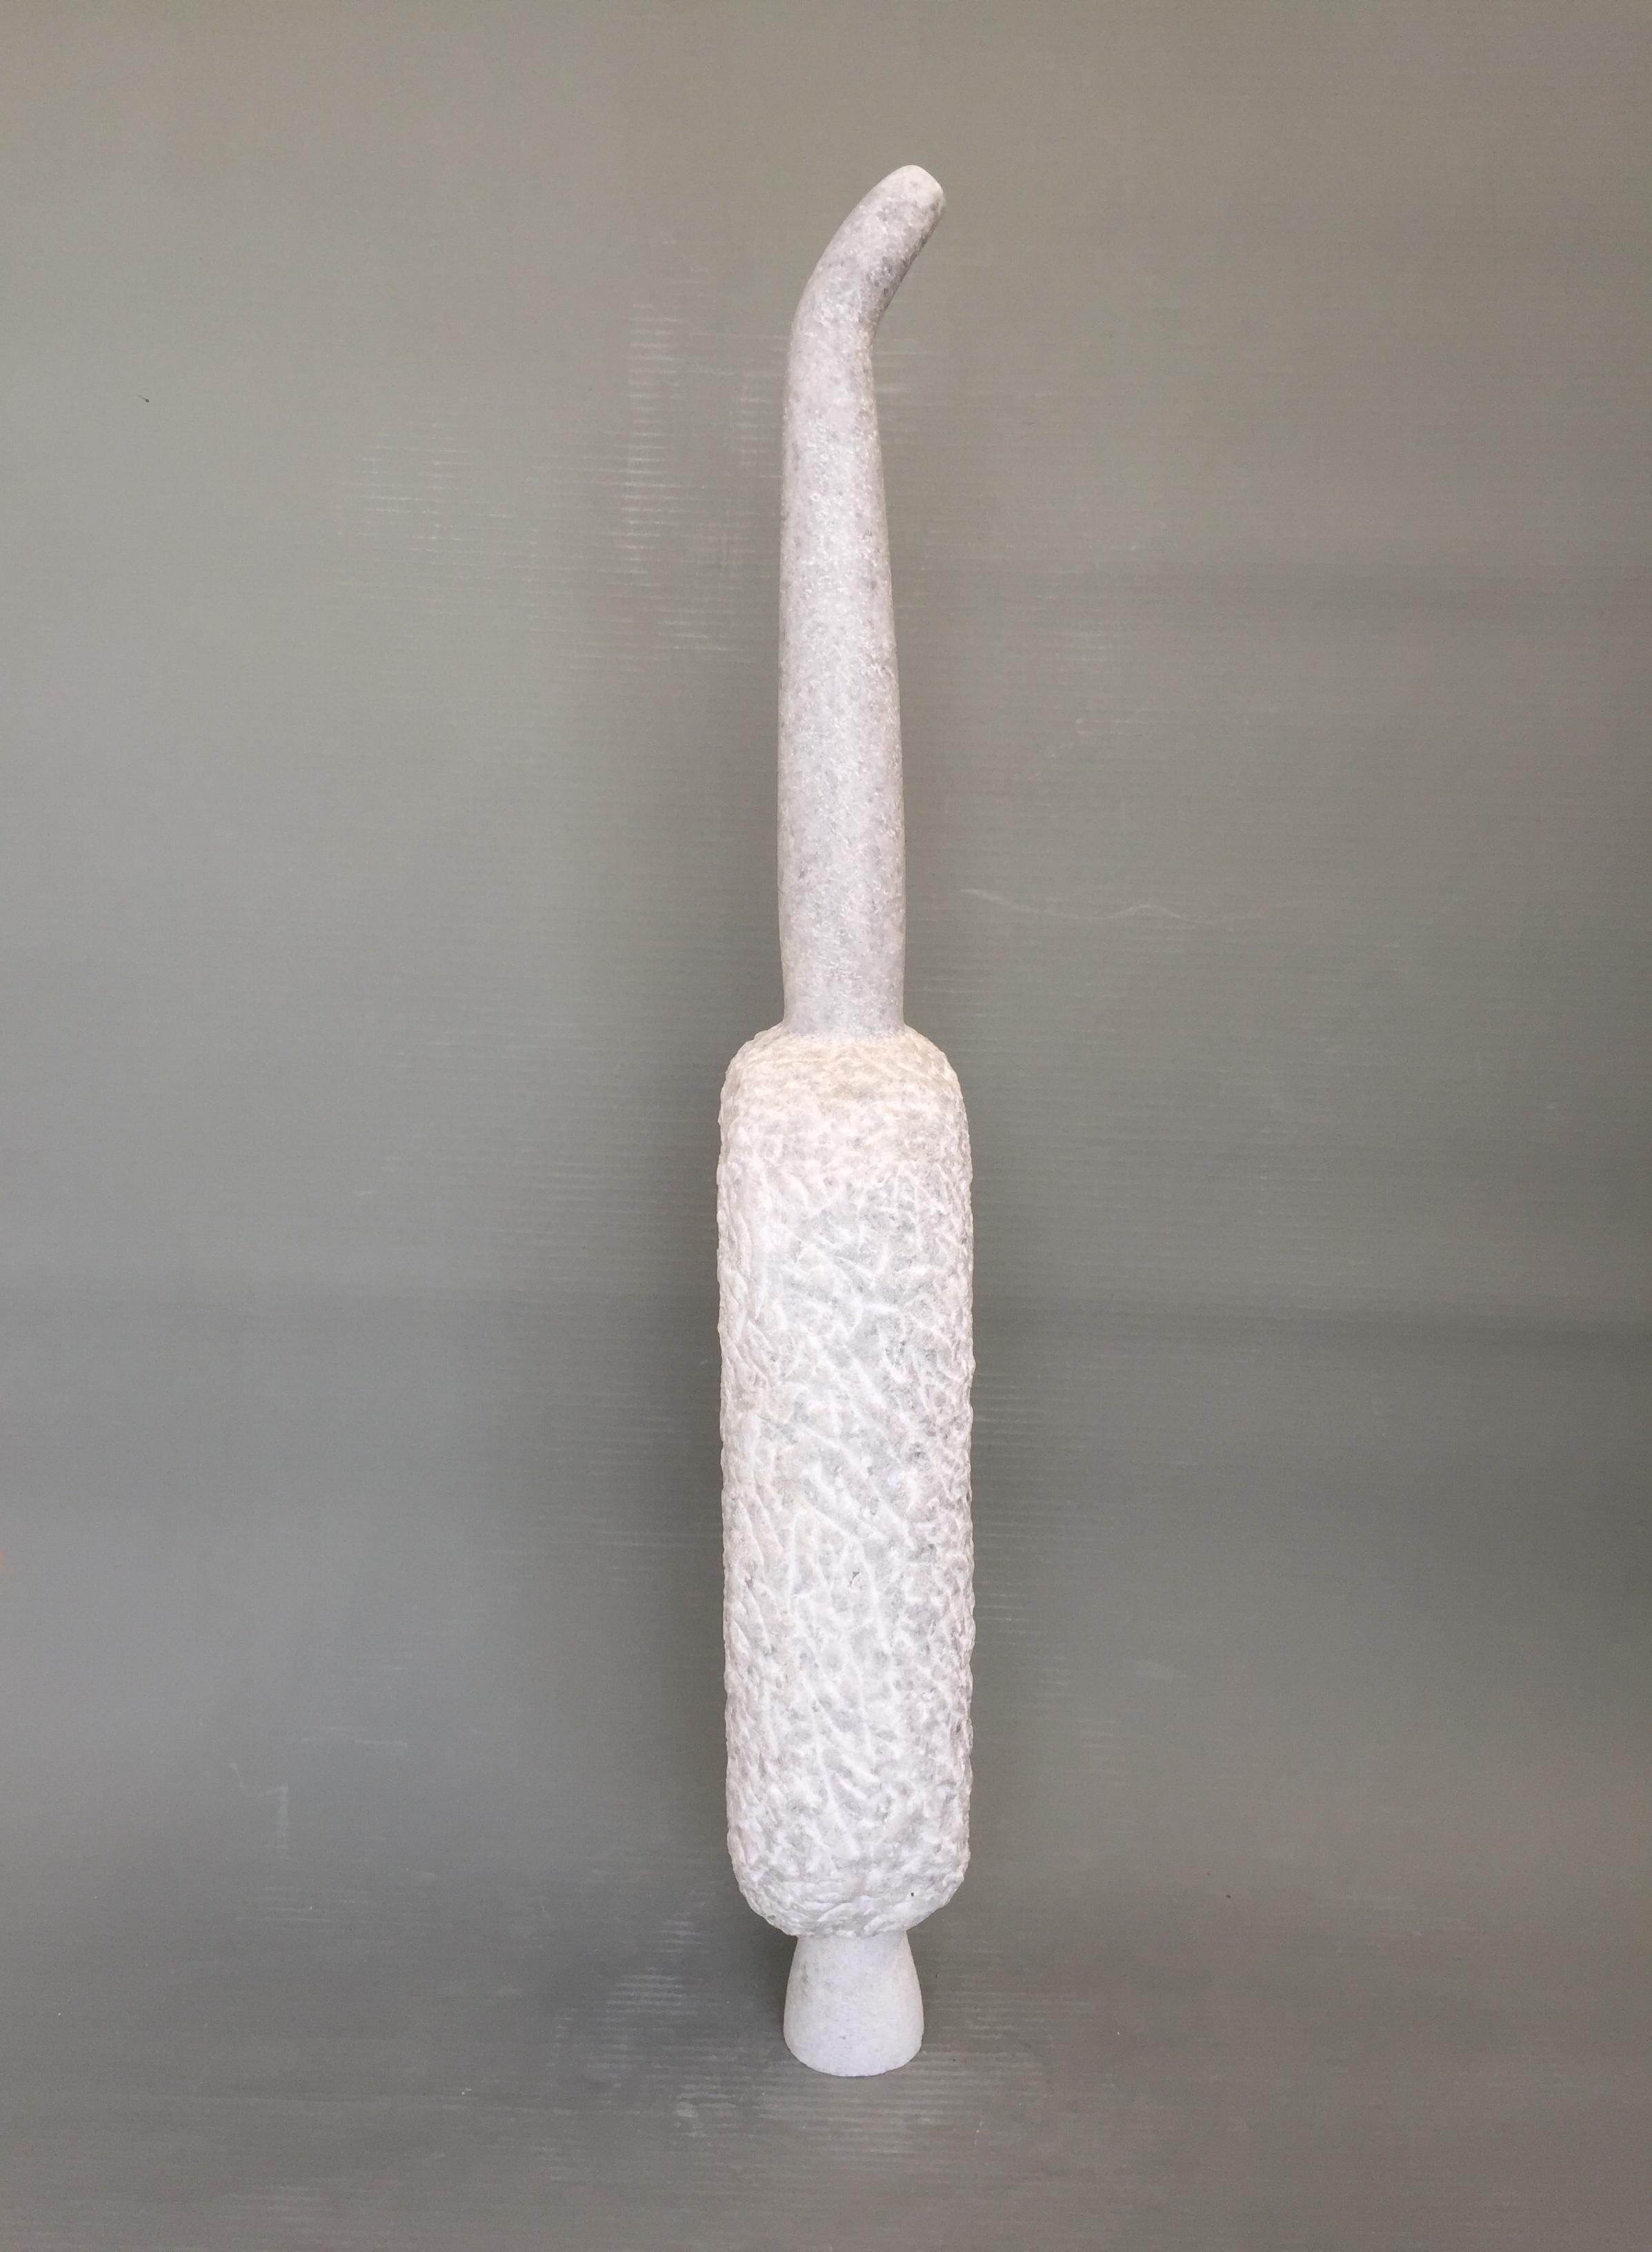 Phoenix, marble sculpture by Tom von Kaenel.
2019.
Dimensions: W 17 x D 10 x H 79 cm.
Materials: naxian marble.

All the artworks of Tom von Kaenel are unique, handcrafted by himself.
The stones all come from the surrounding marble quarries of